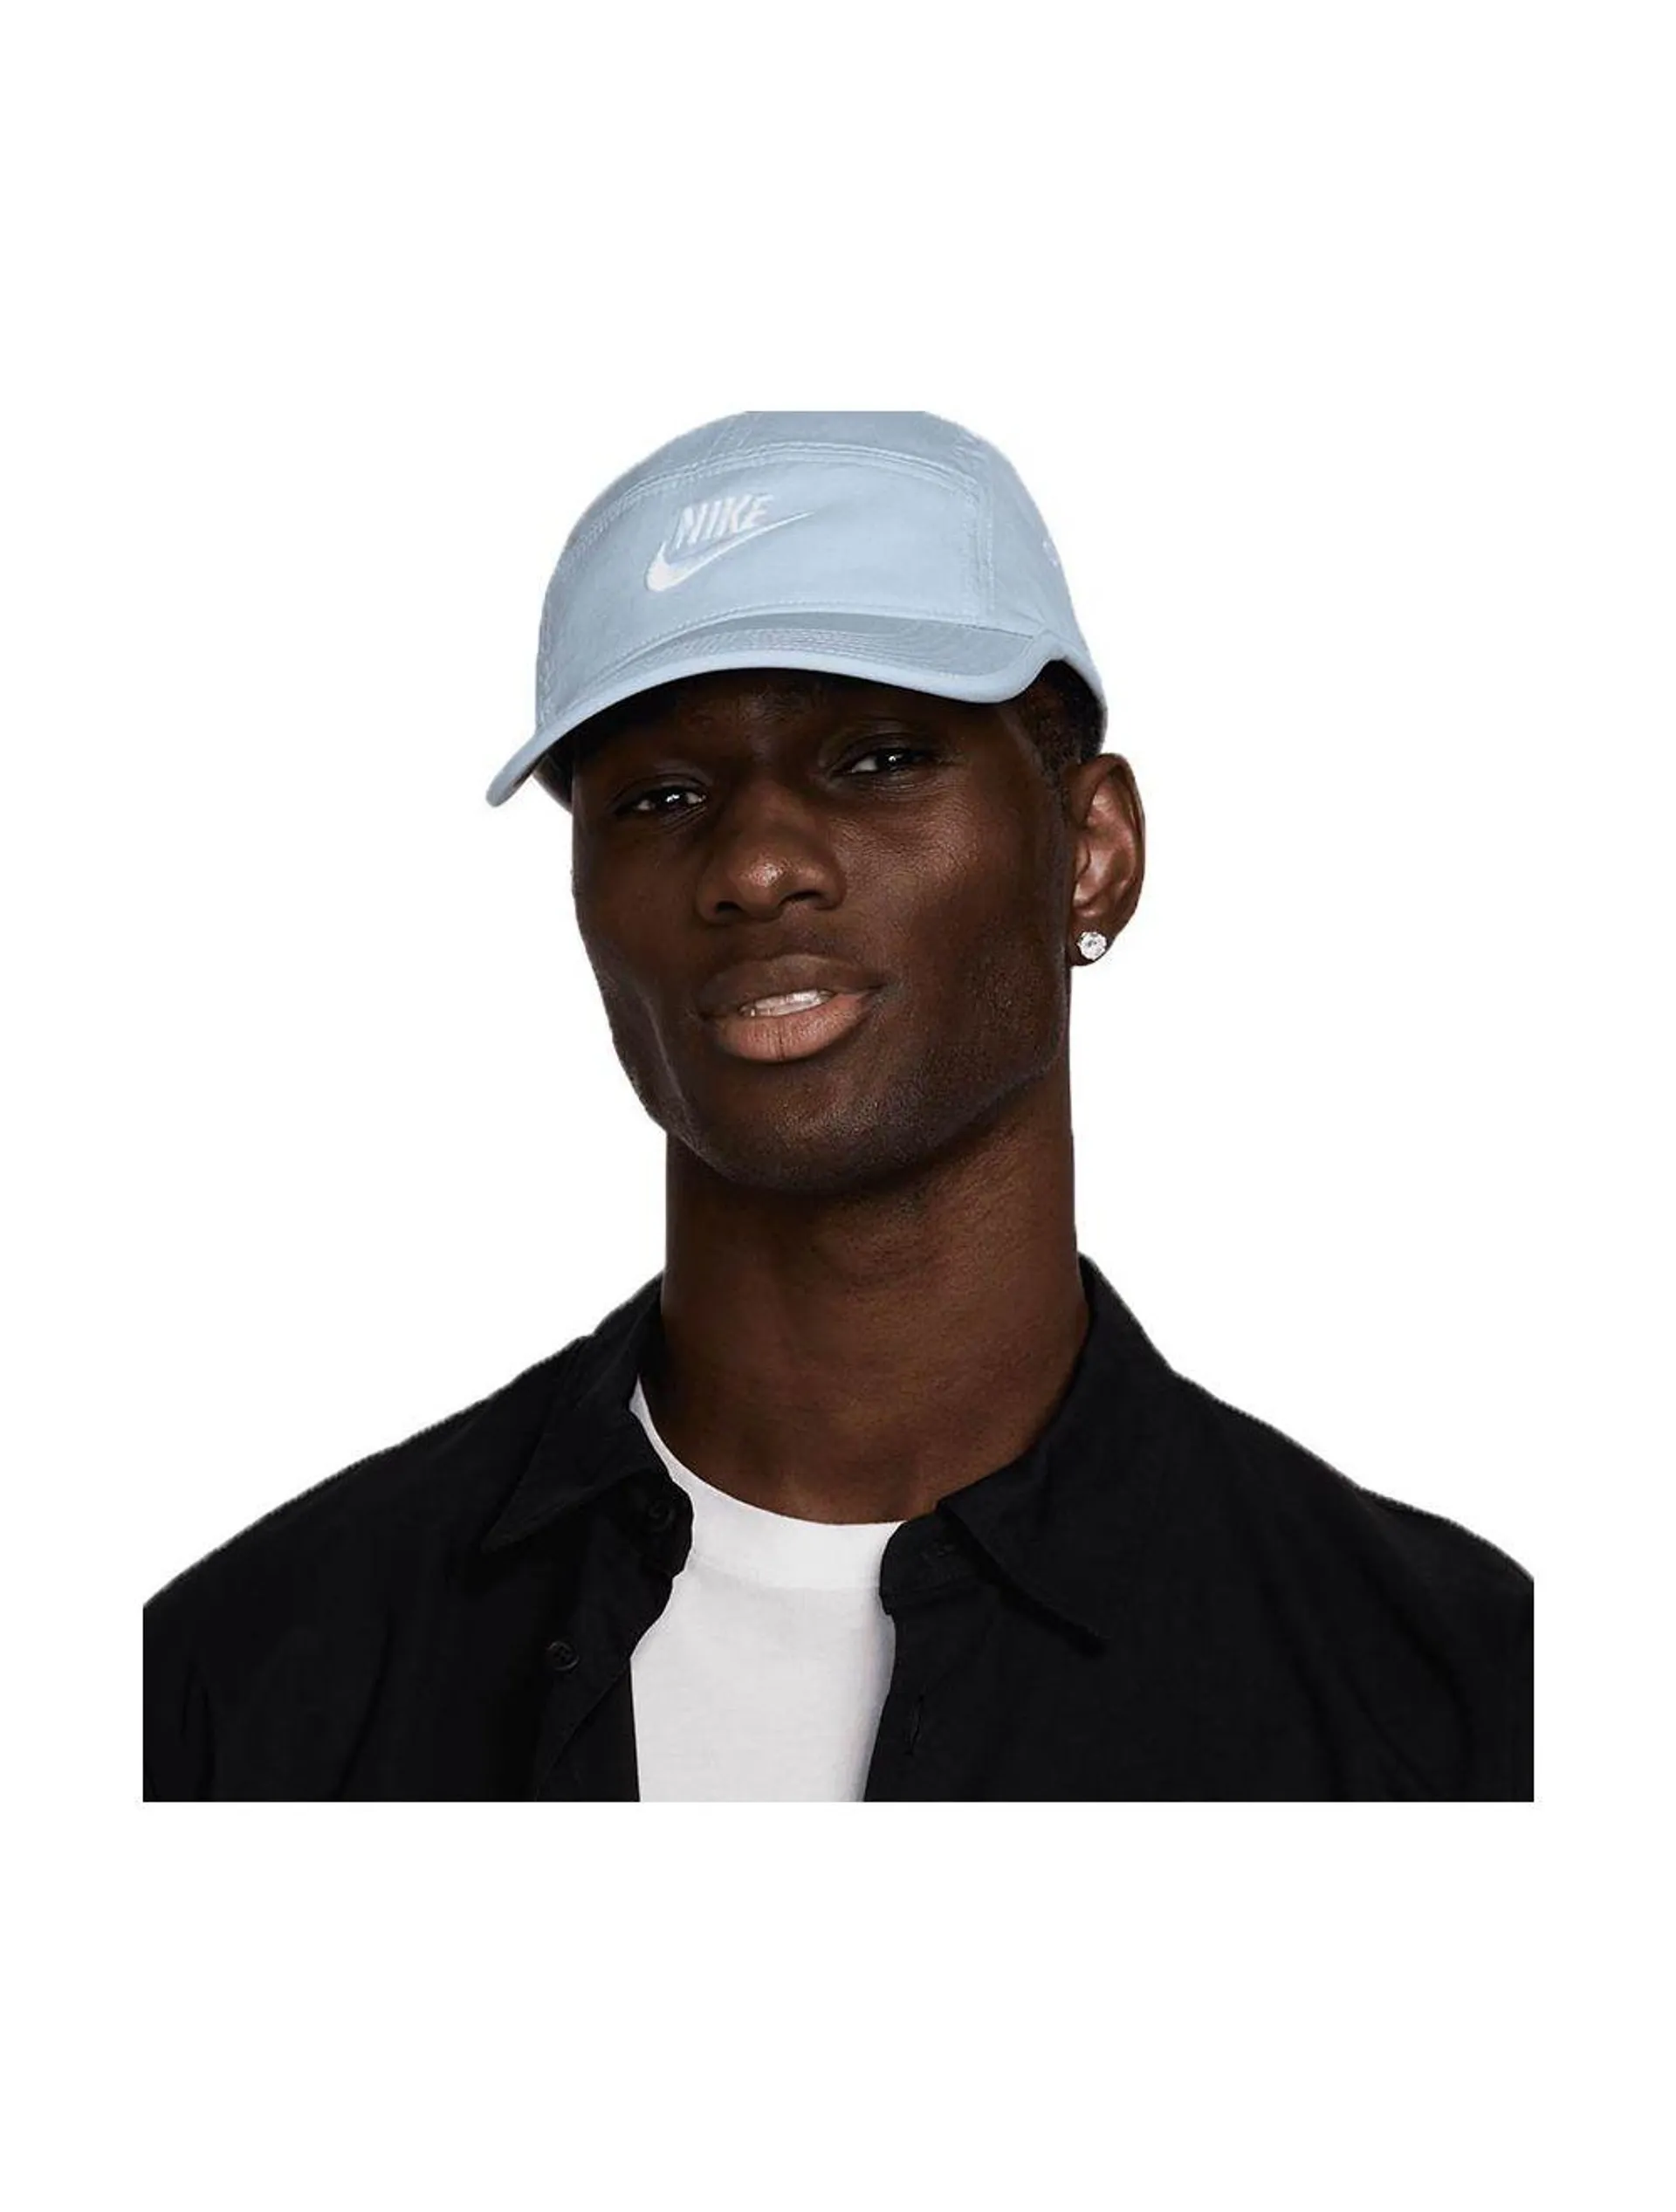 Nike Fly Unstructured Futura Cap Light Blue